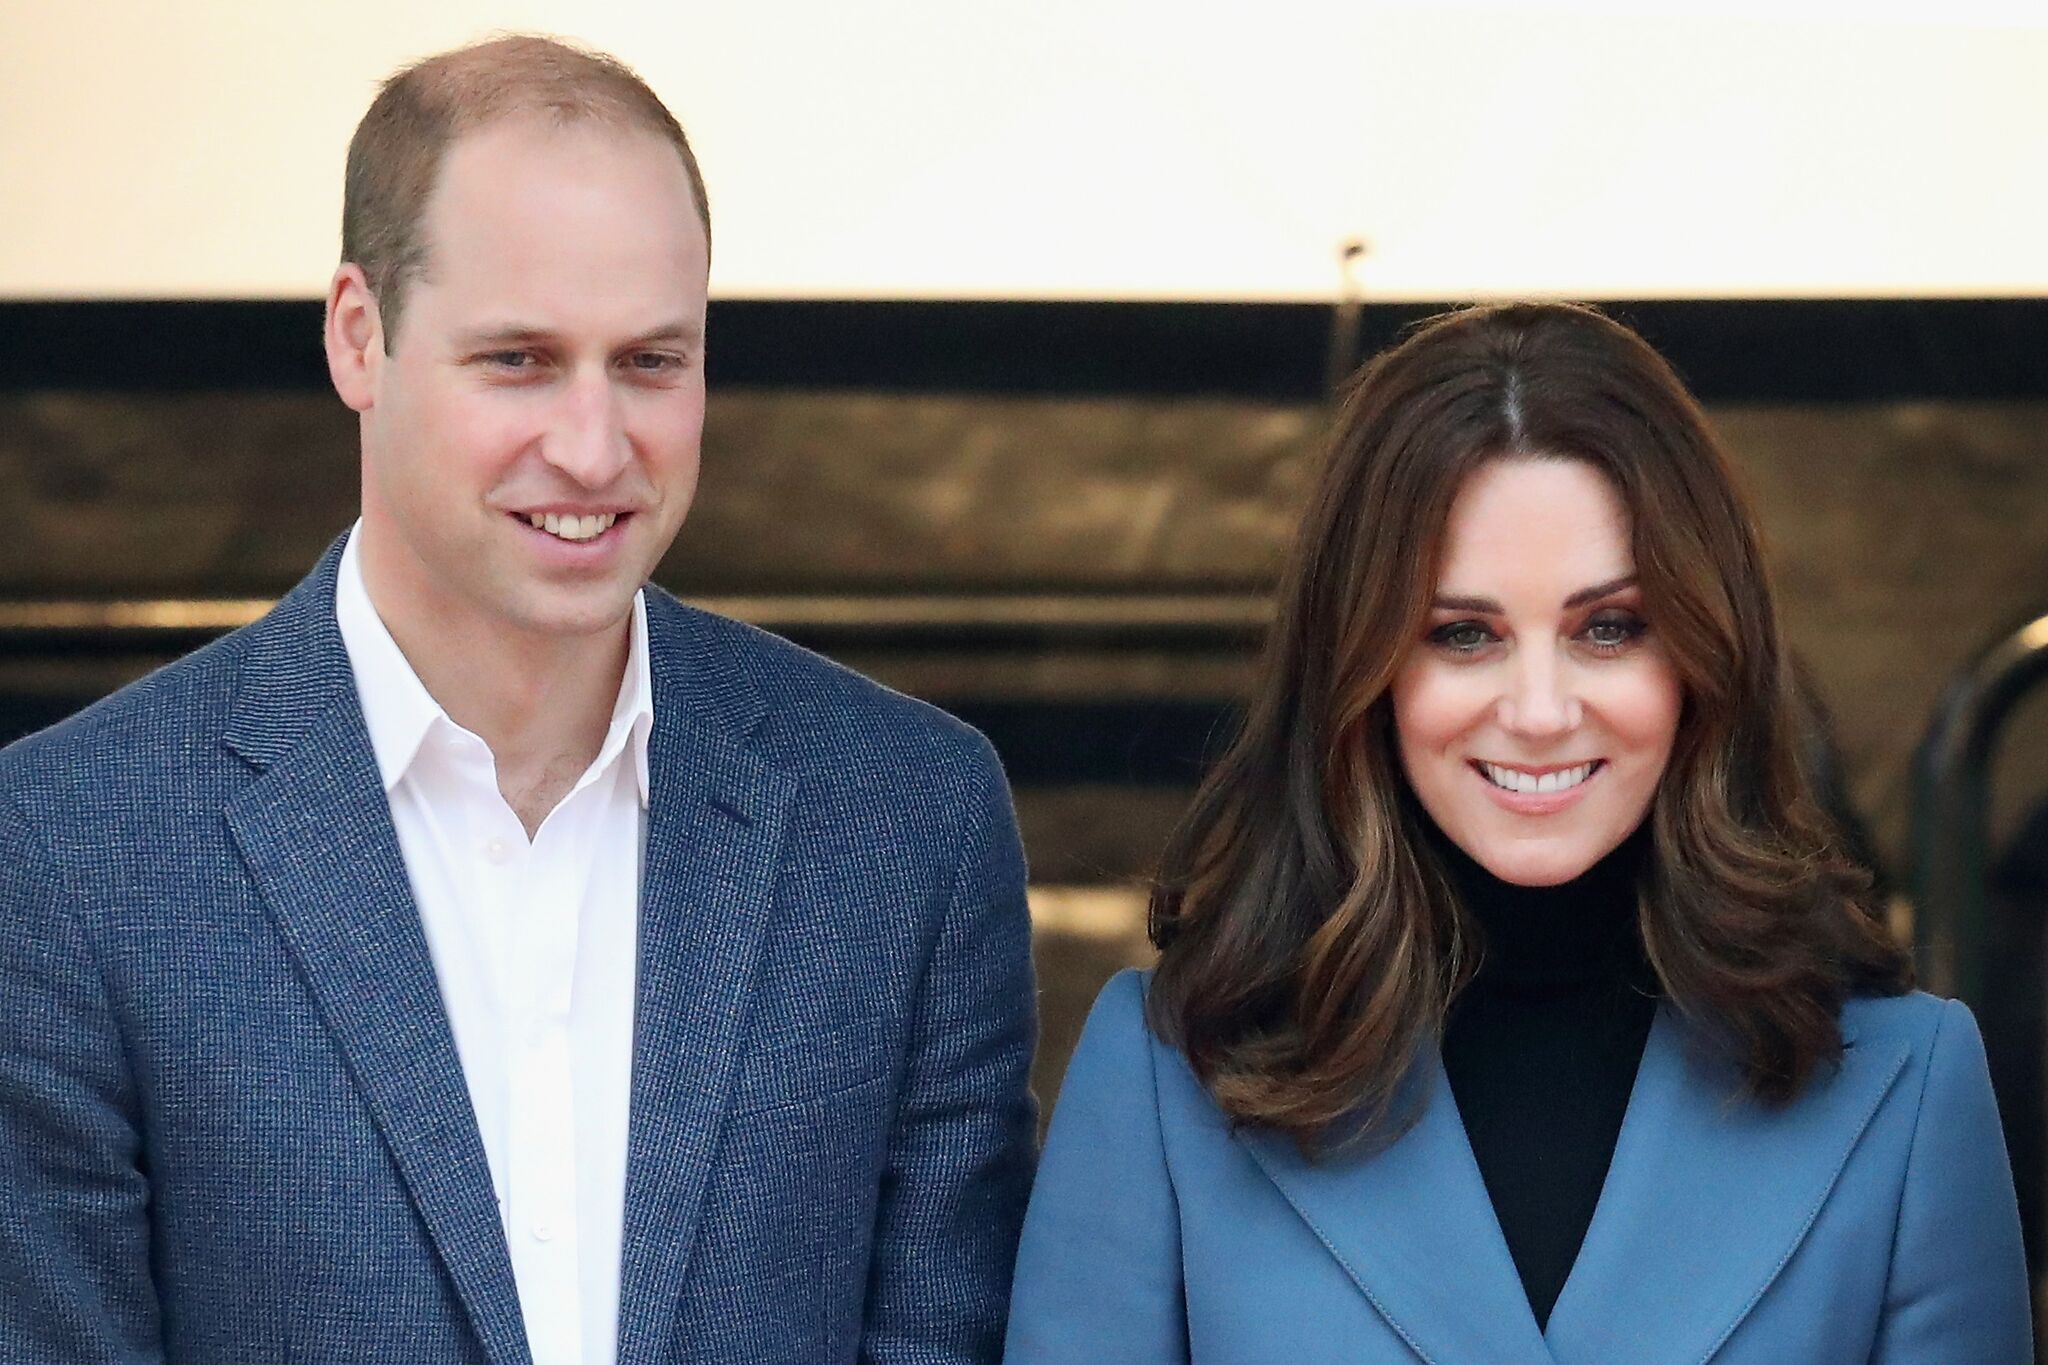 Prince William and Kate Middleton attend the Coach Core graduation ceremony at The London Stadium on October 18, 2017. | Photo: Getty Images